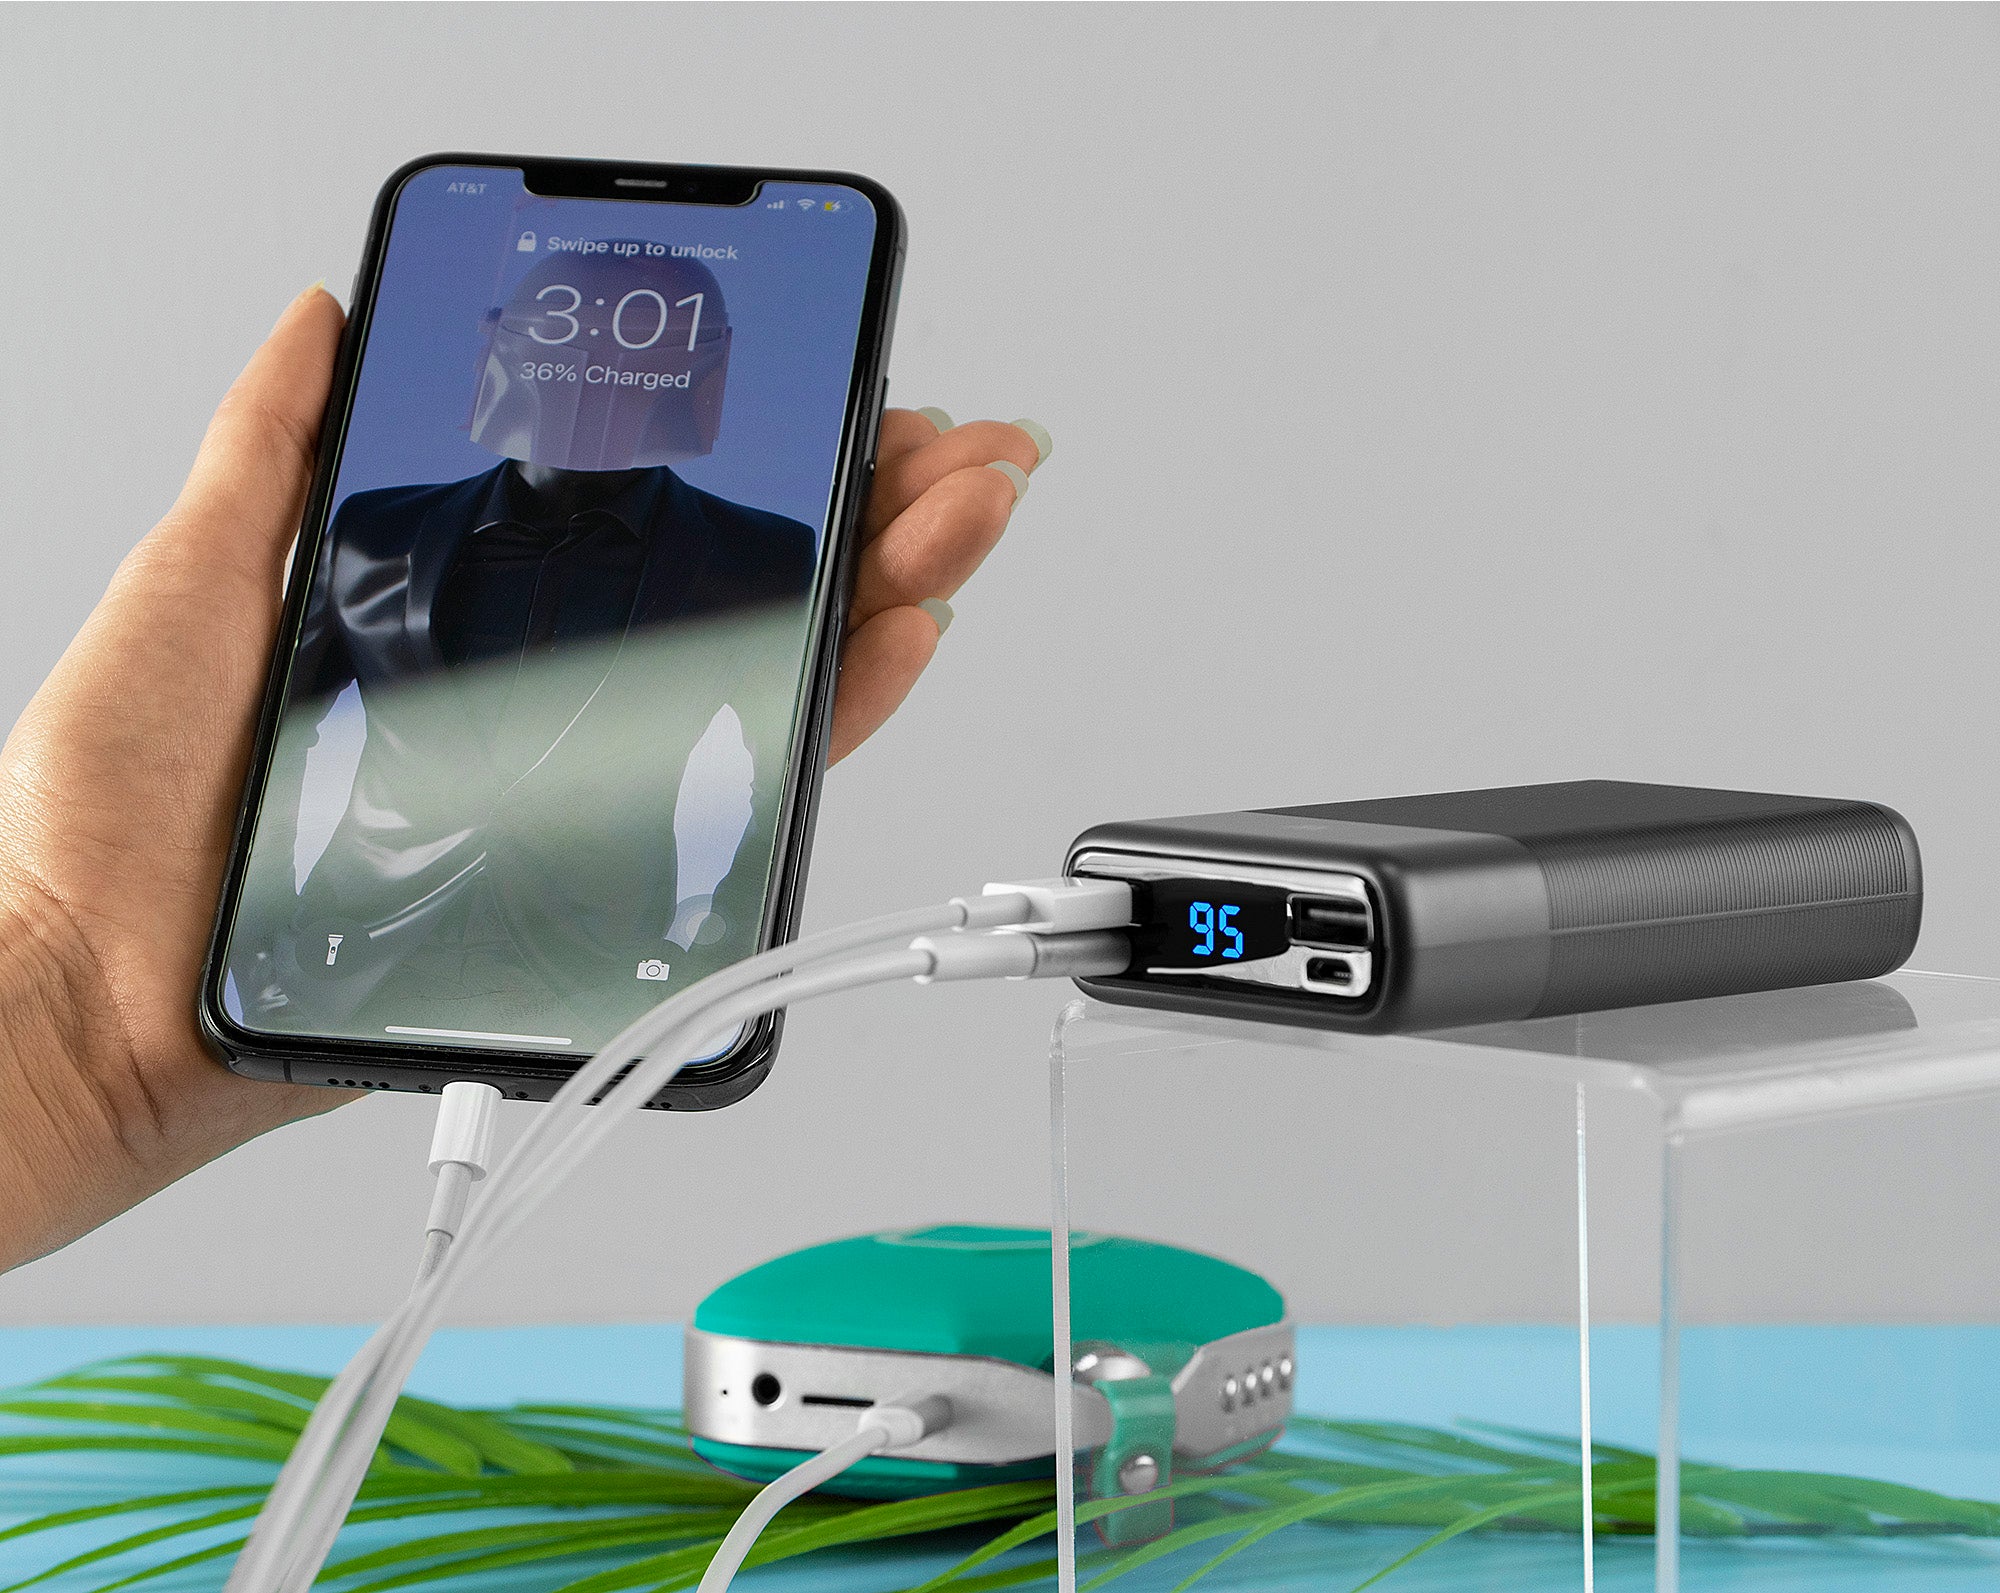 Just Wireless 10,000 mAh 3-Port USB Power Bank with Power Delivery. Delivers 10,000 mAh of portable power. Faster charge with power delivery. Charge 3 devices at the same time. 2 USB-A charging ports and 1 USB-C charging port. Digital battery indicator display screen. 3-foot micro USB charging cable and user manual included. Universally compatible with any standard USB-A device